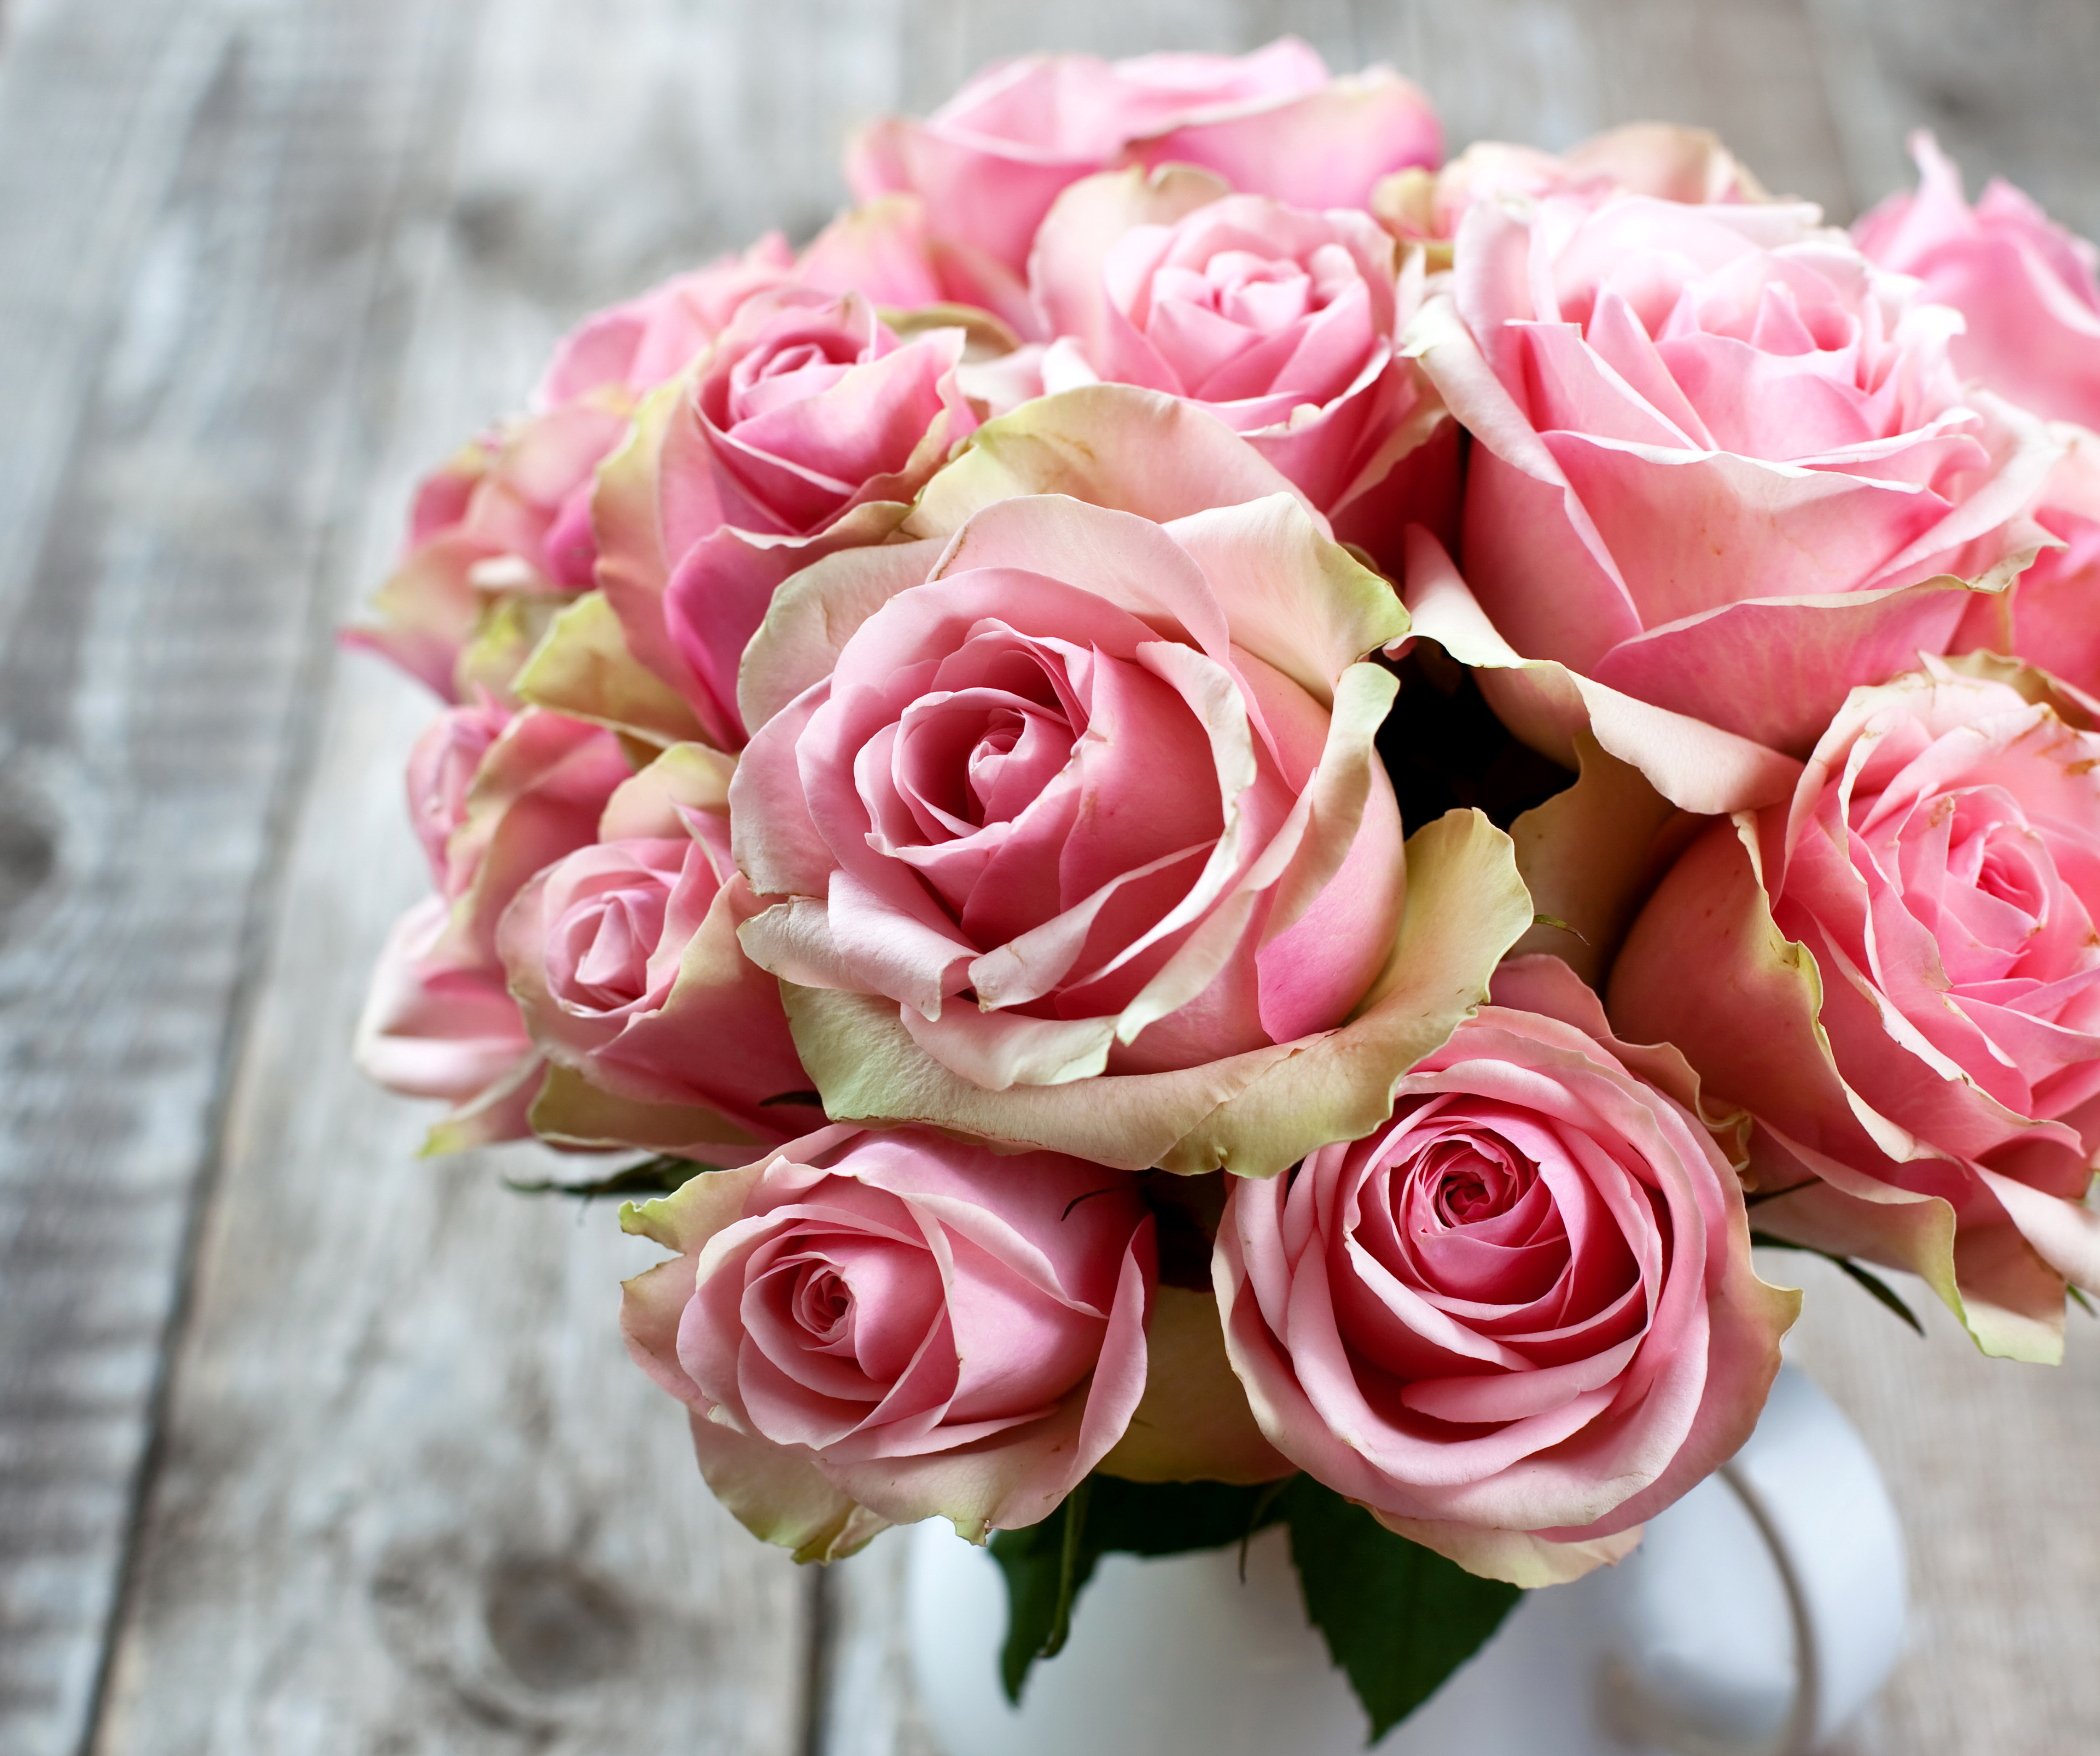 Bouquets_Roses_Pink_496424.jpg